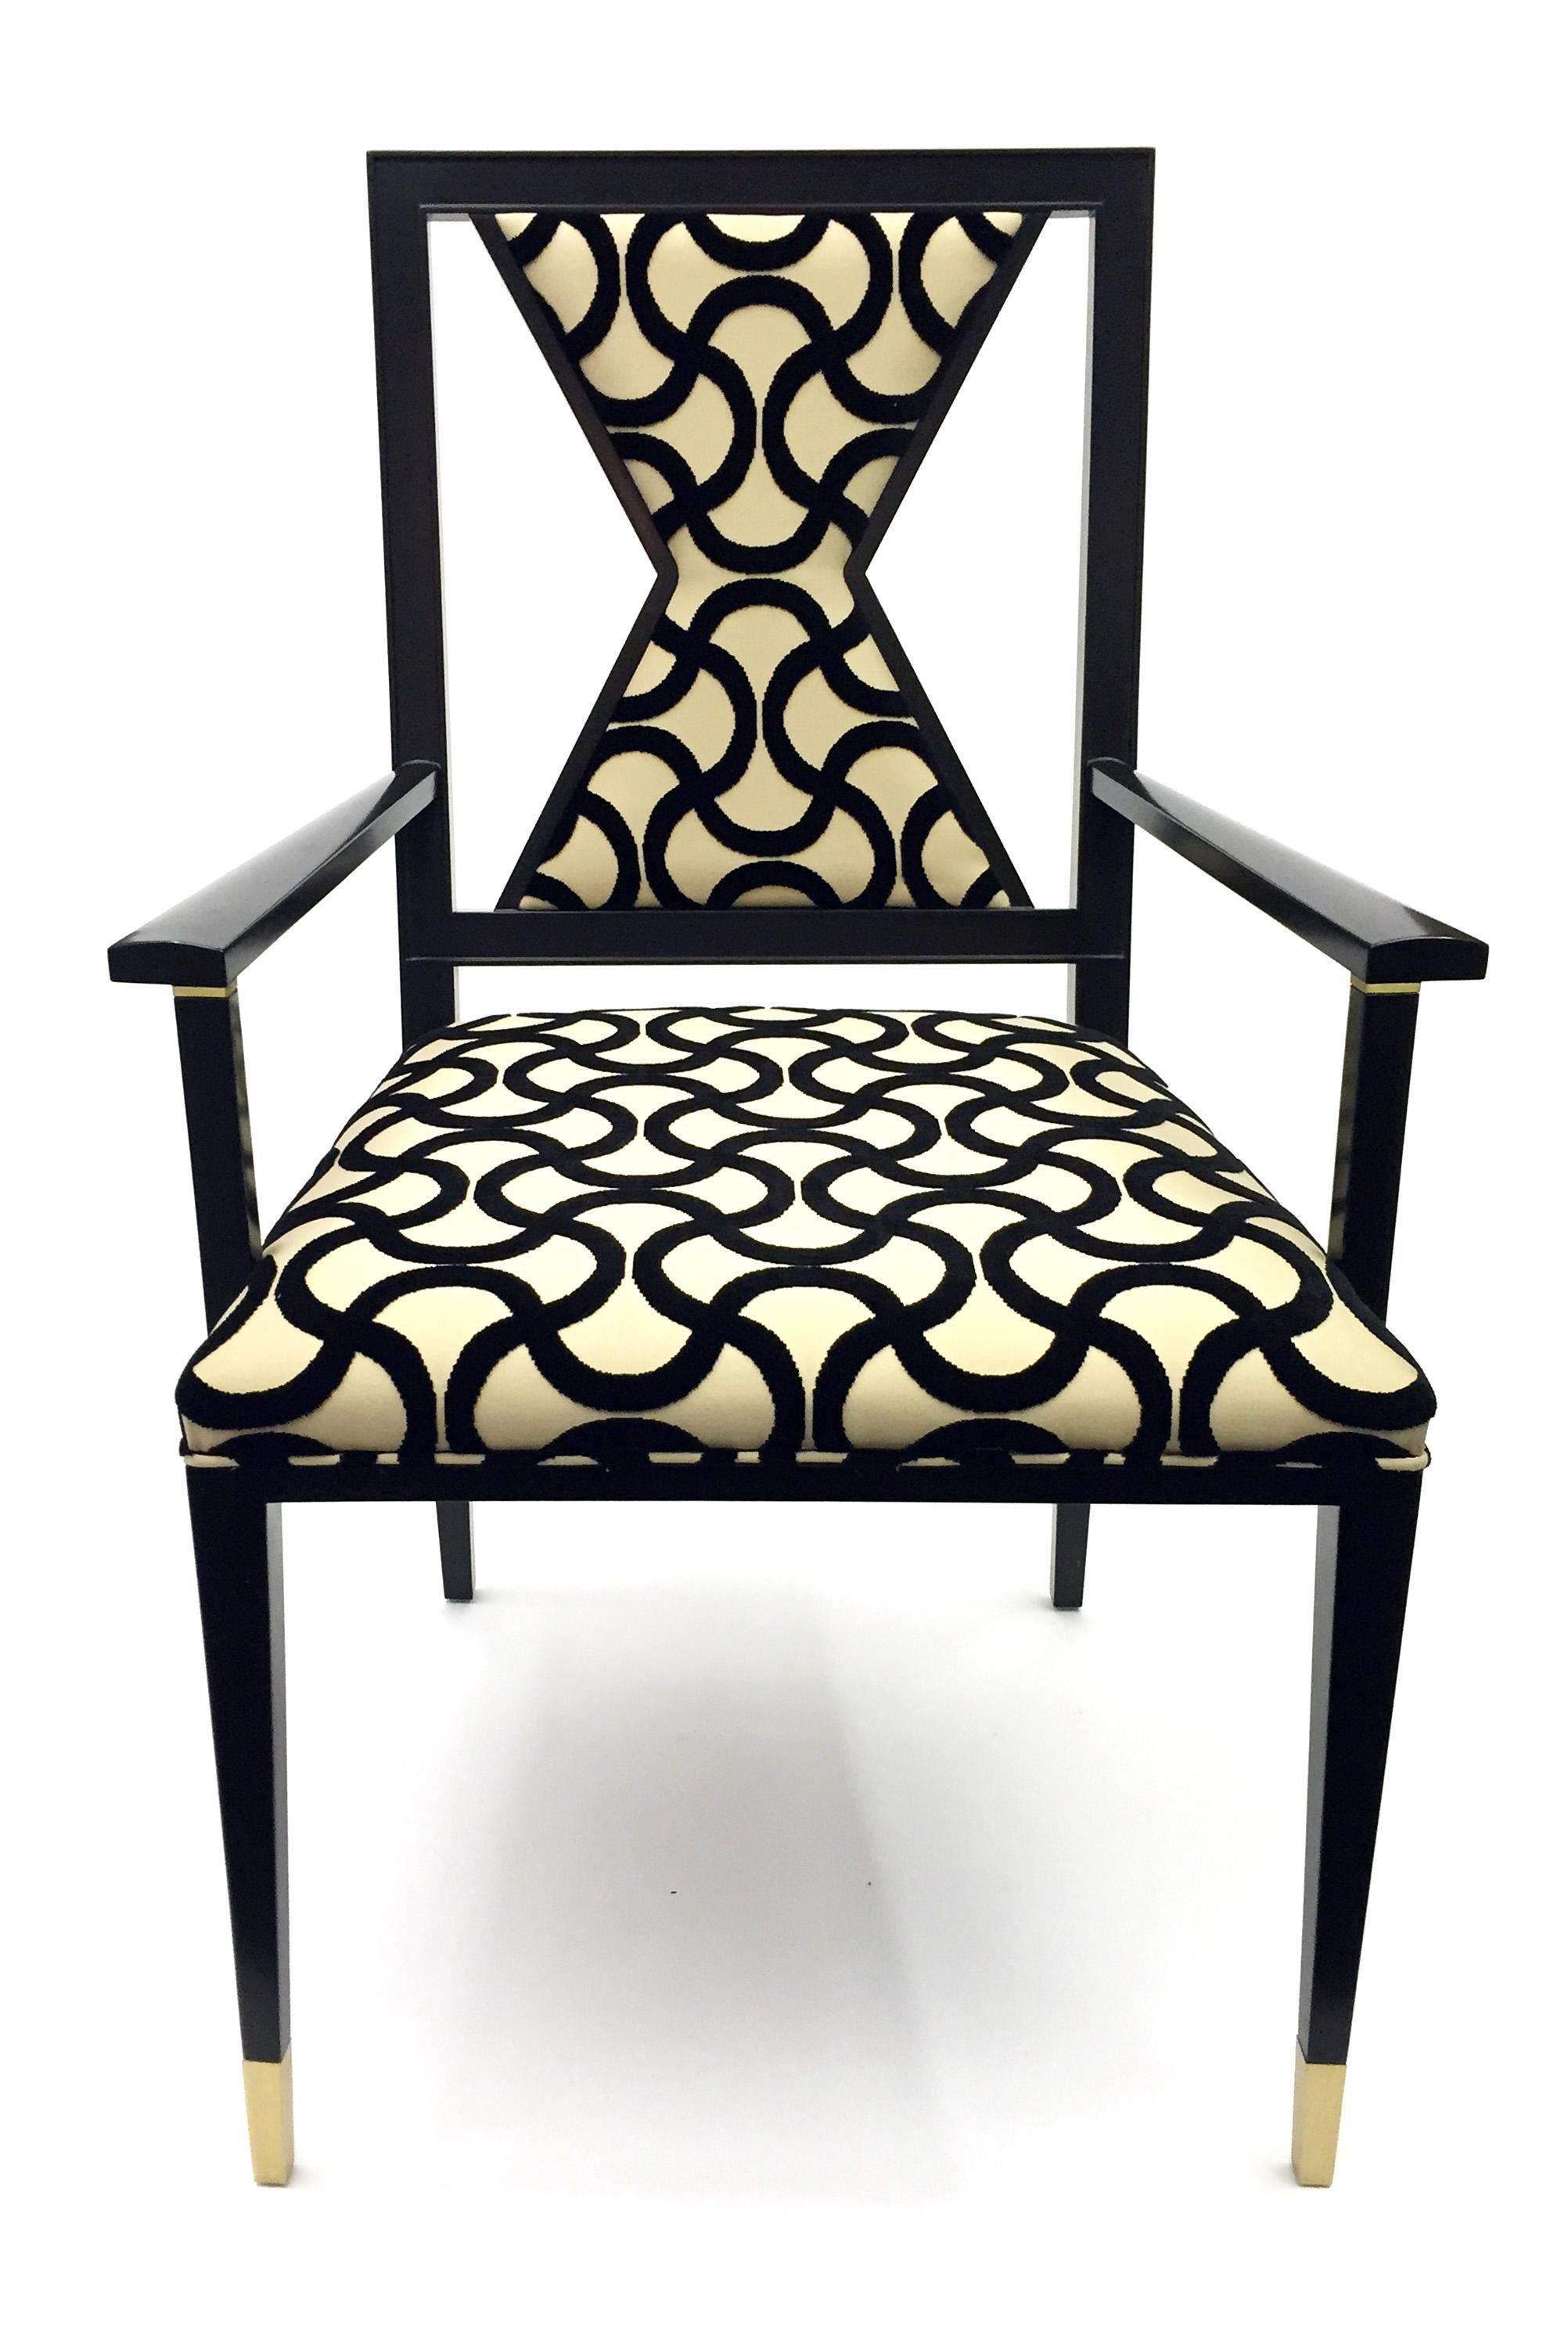 Ebonized Wooden Armchair with Geometrical Backrest and Pattern Upholstery by Juan Montoya For Sale